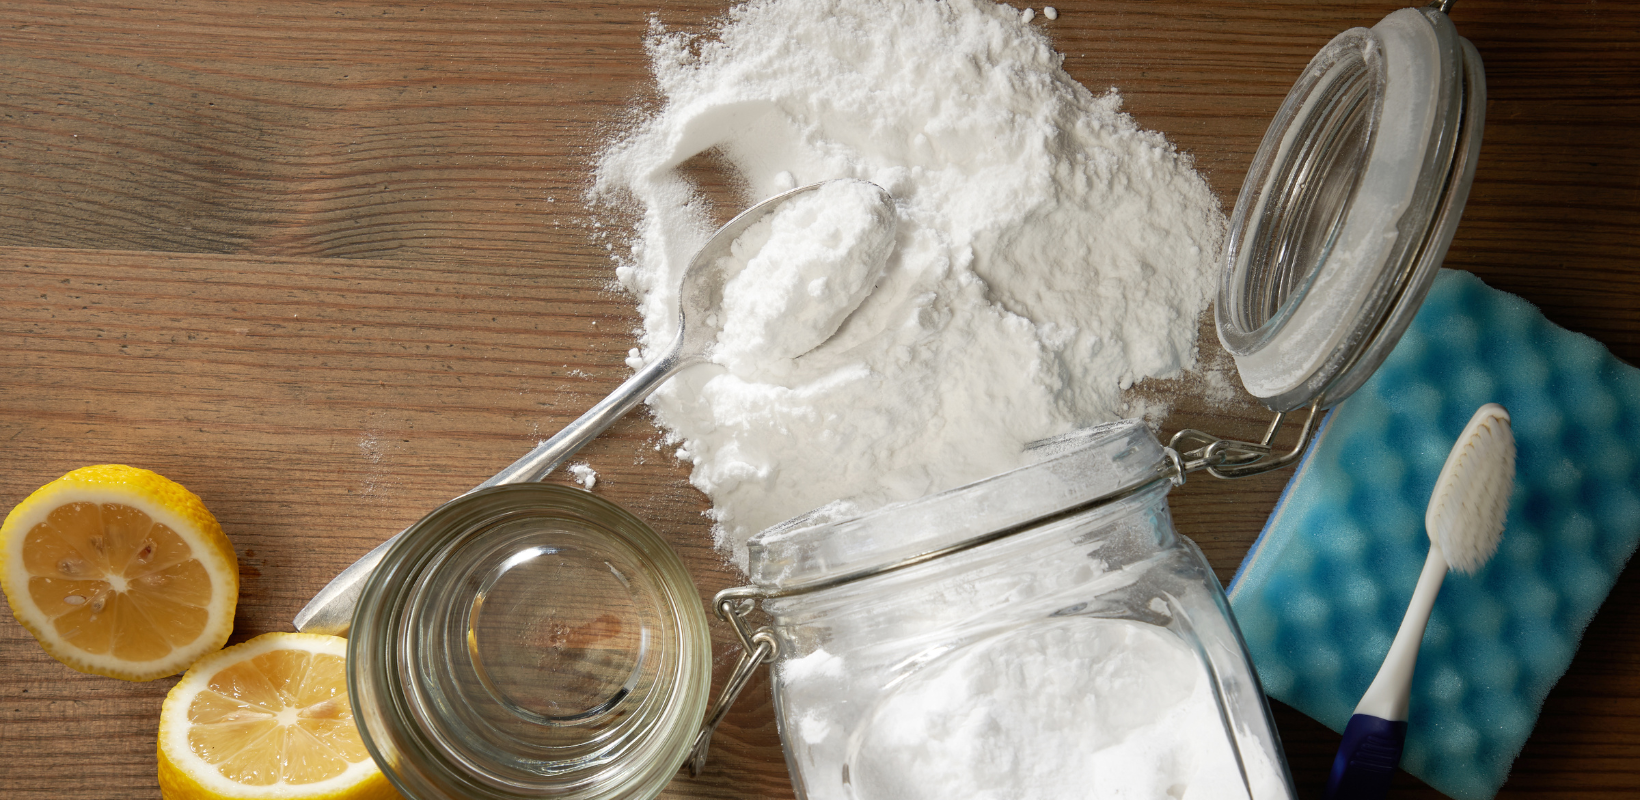 Place baking soda throughout the home